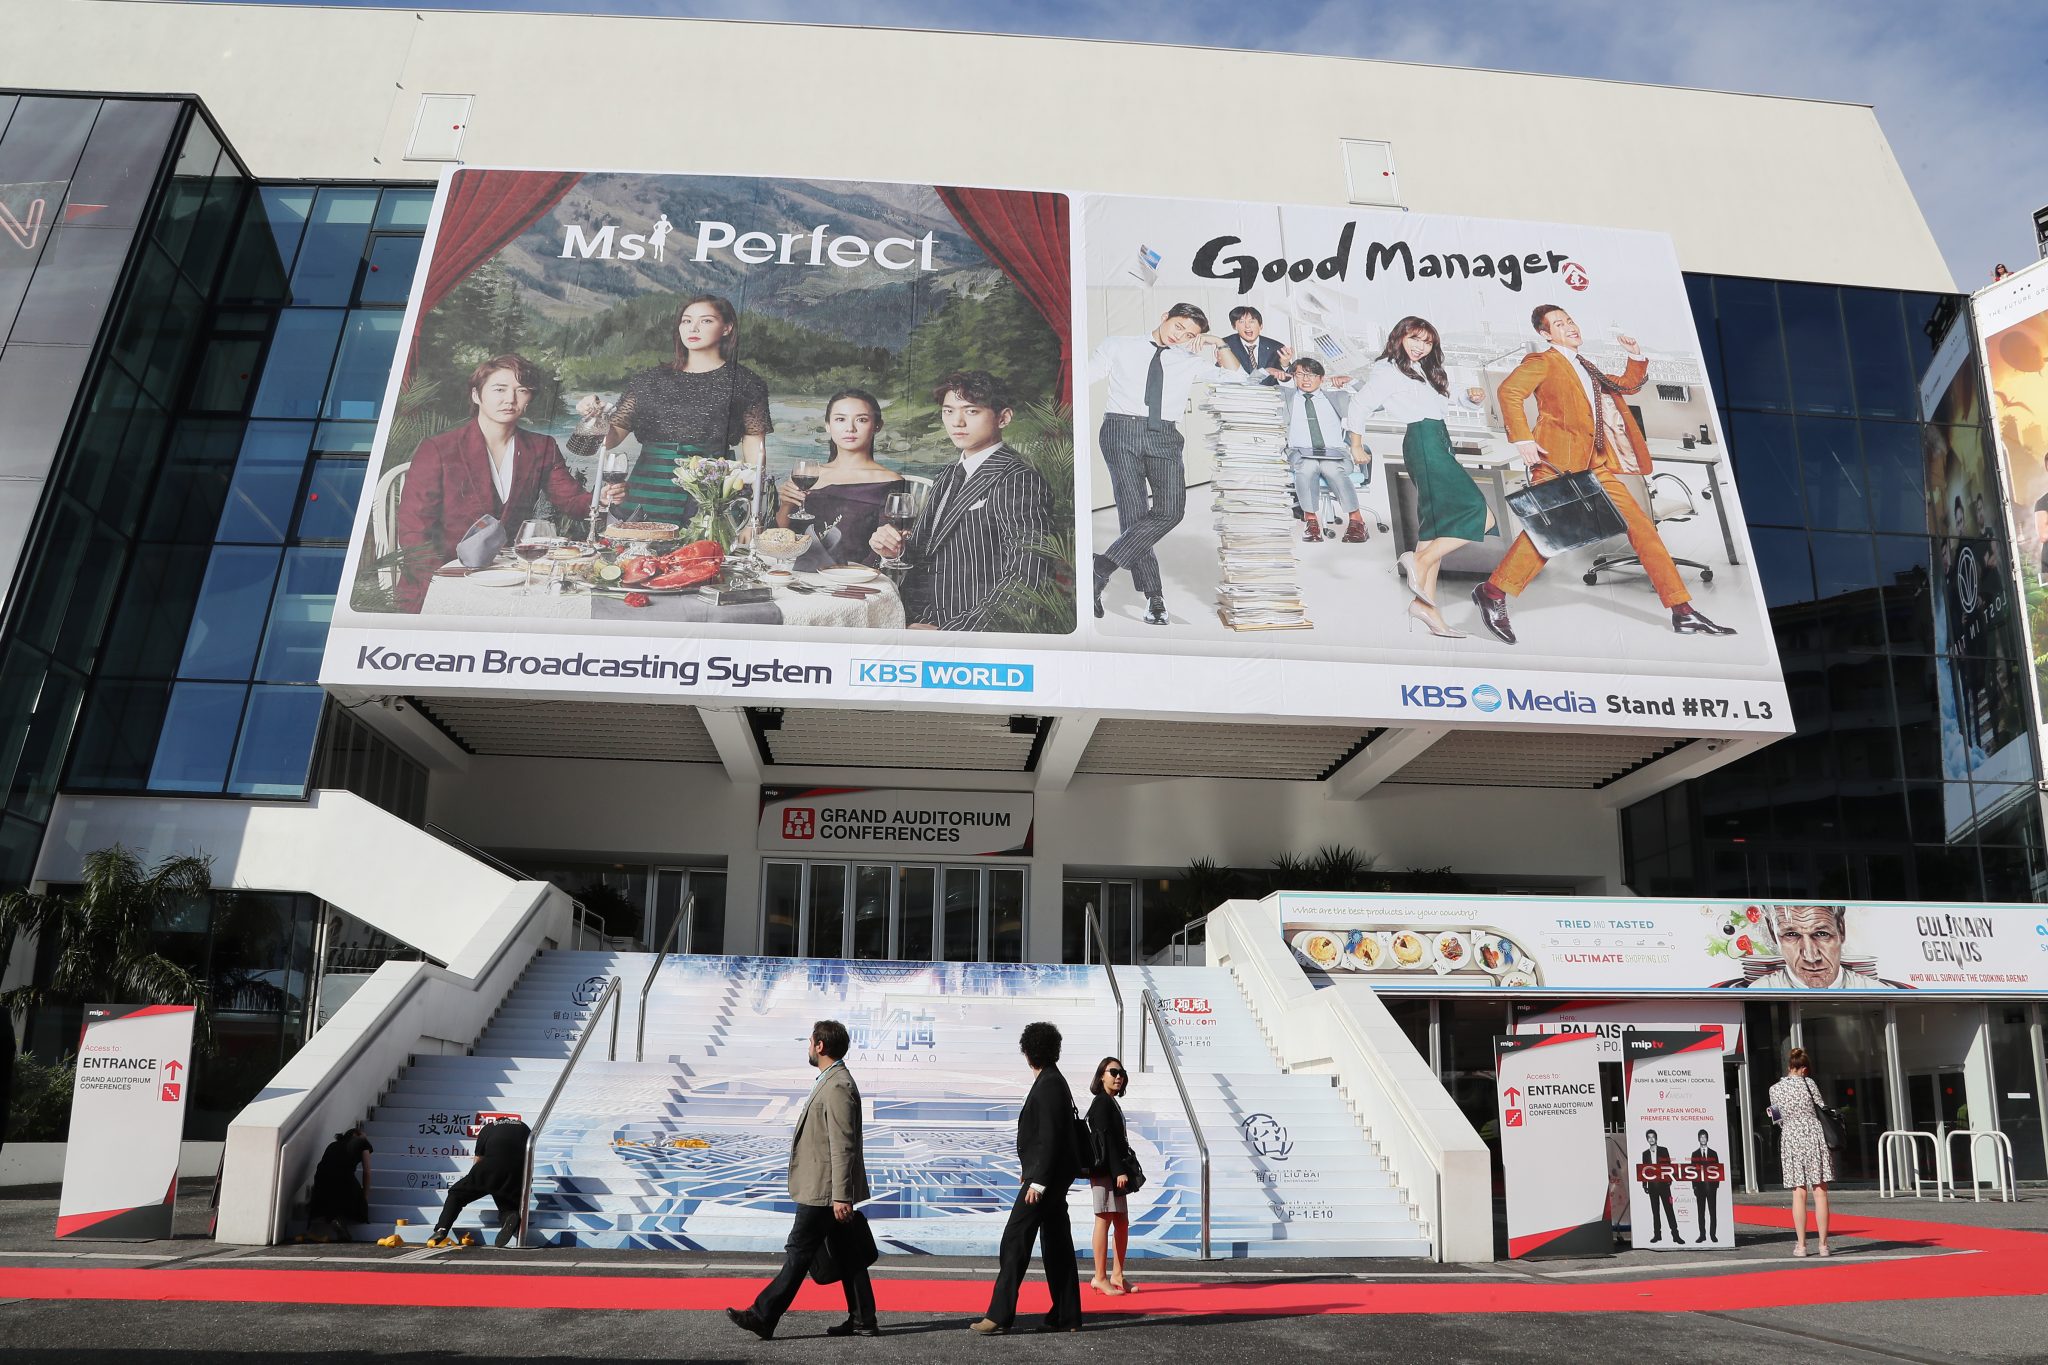 People walk past  billboards for the series "Ms Perfect" and "Good Manager" outside the Palais des Festivals during the MIPTV event on April 3, 2017 in Cannes, southeastern France. / AFP PHOTO / VALERY HACHE